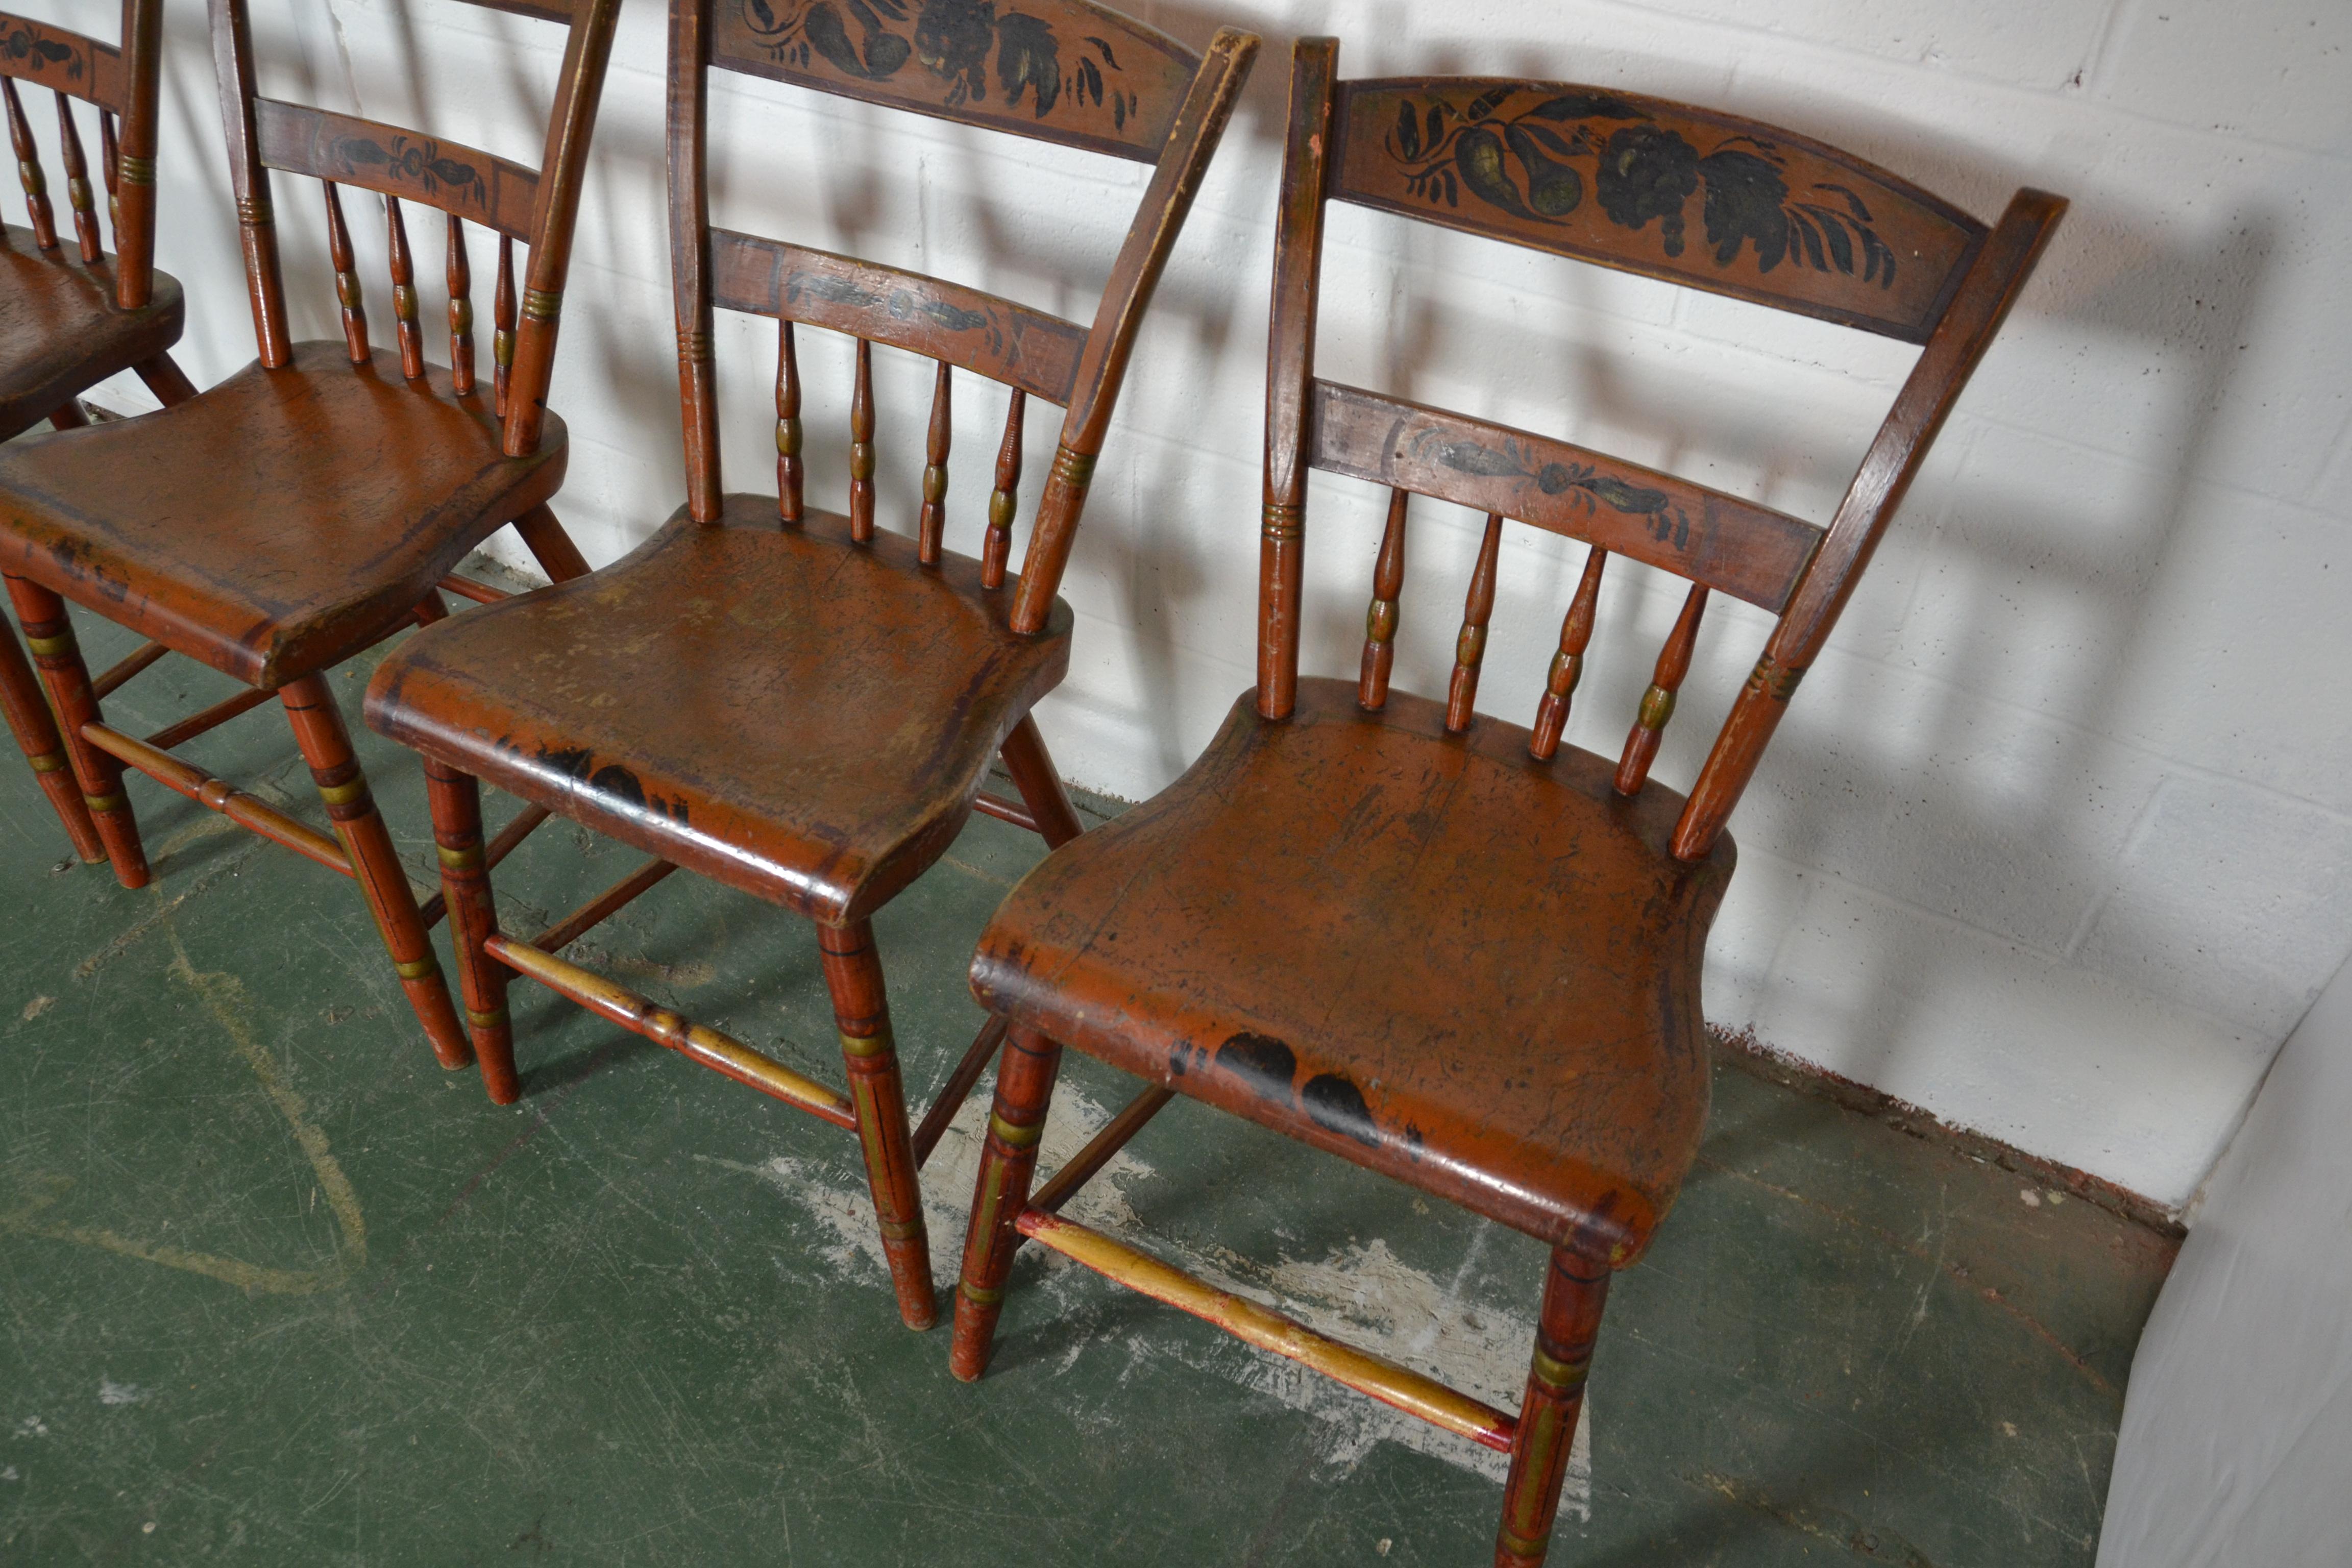 1820 American hand painted set of four Hitchcock chairs.